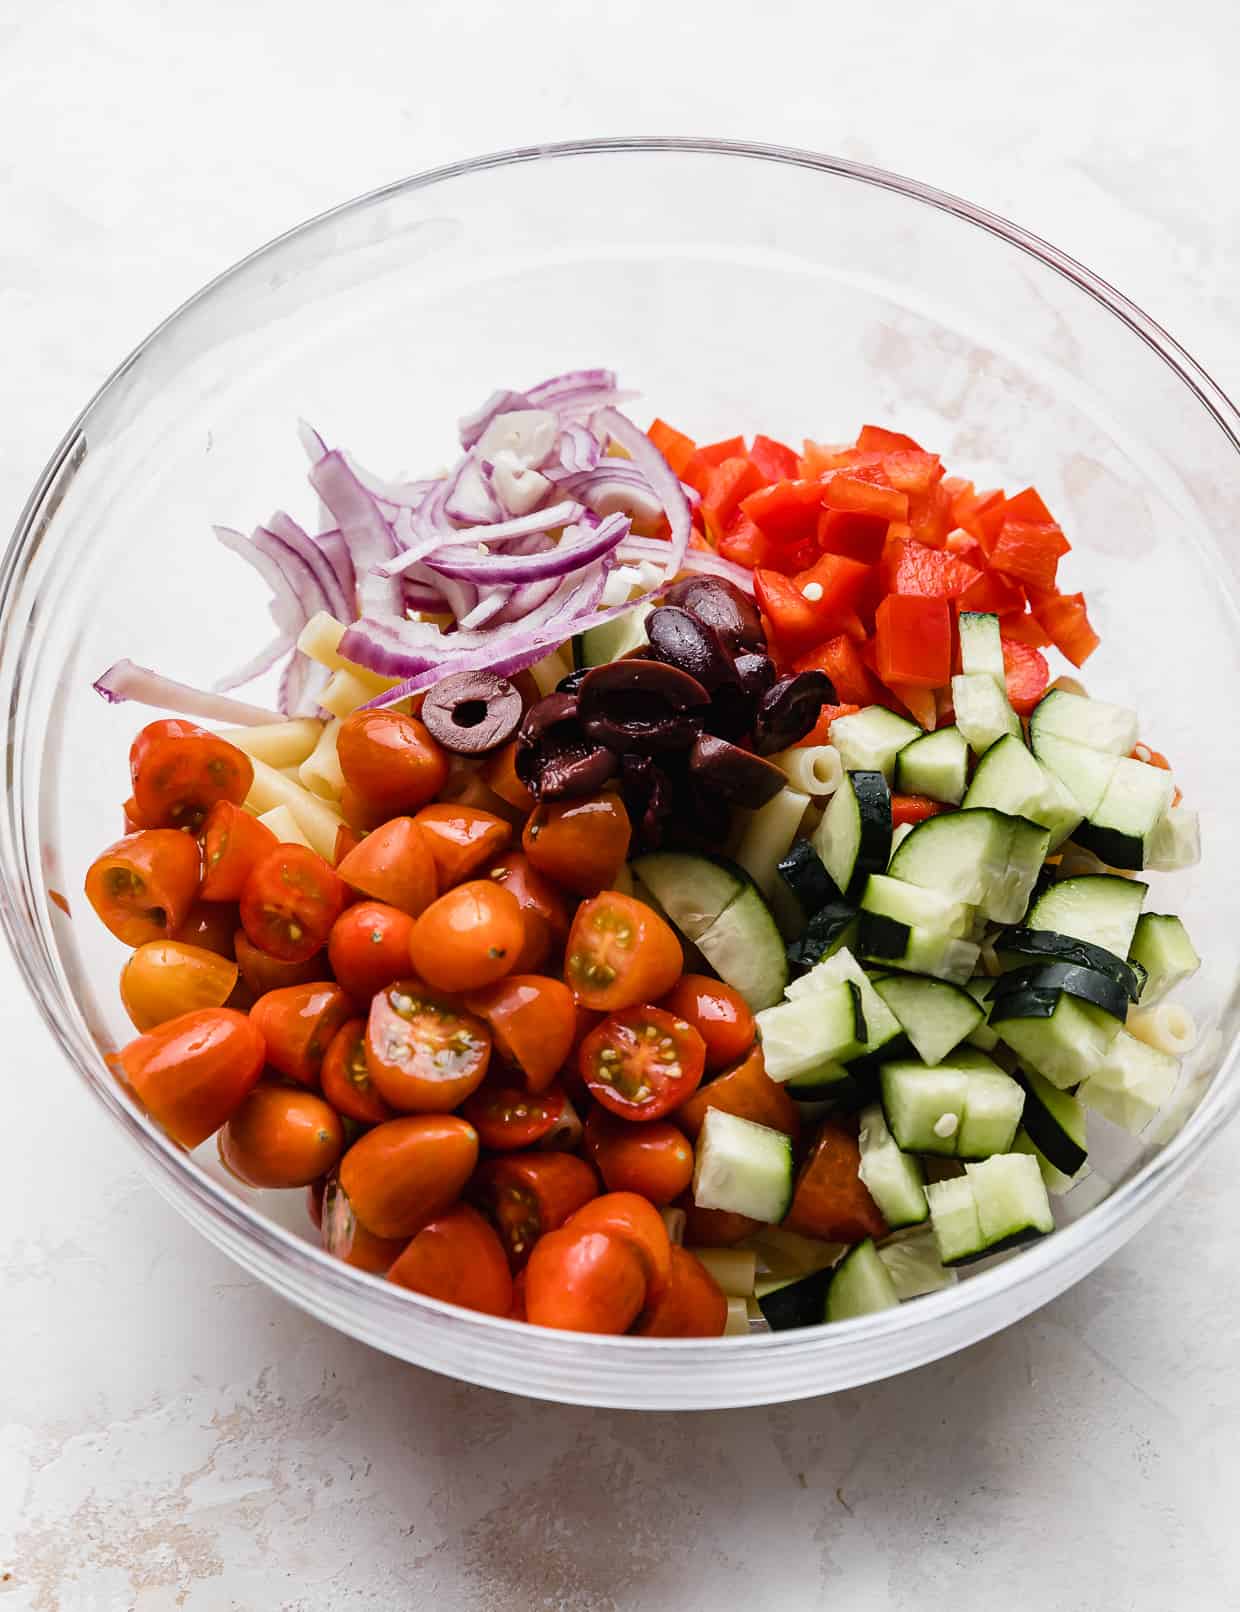 Penne noodles, tomatoes, kalamata olives, cucumbers, red onion, and red pepper in a glass bowl.